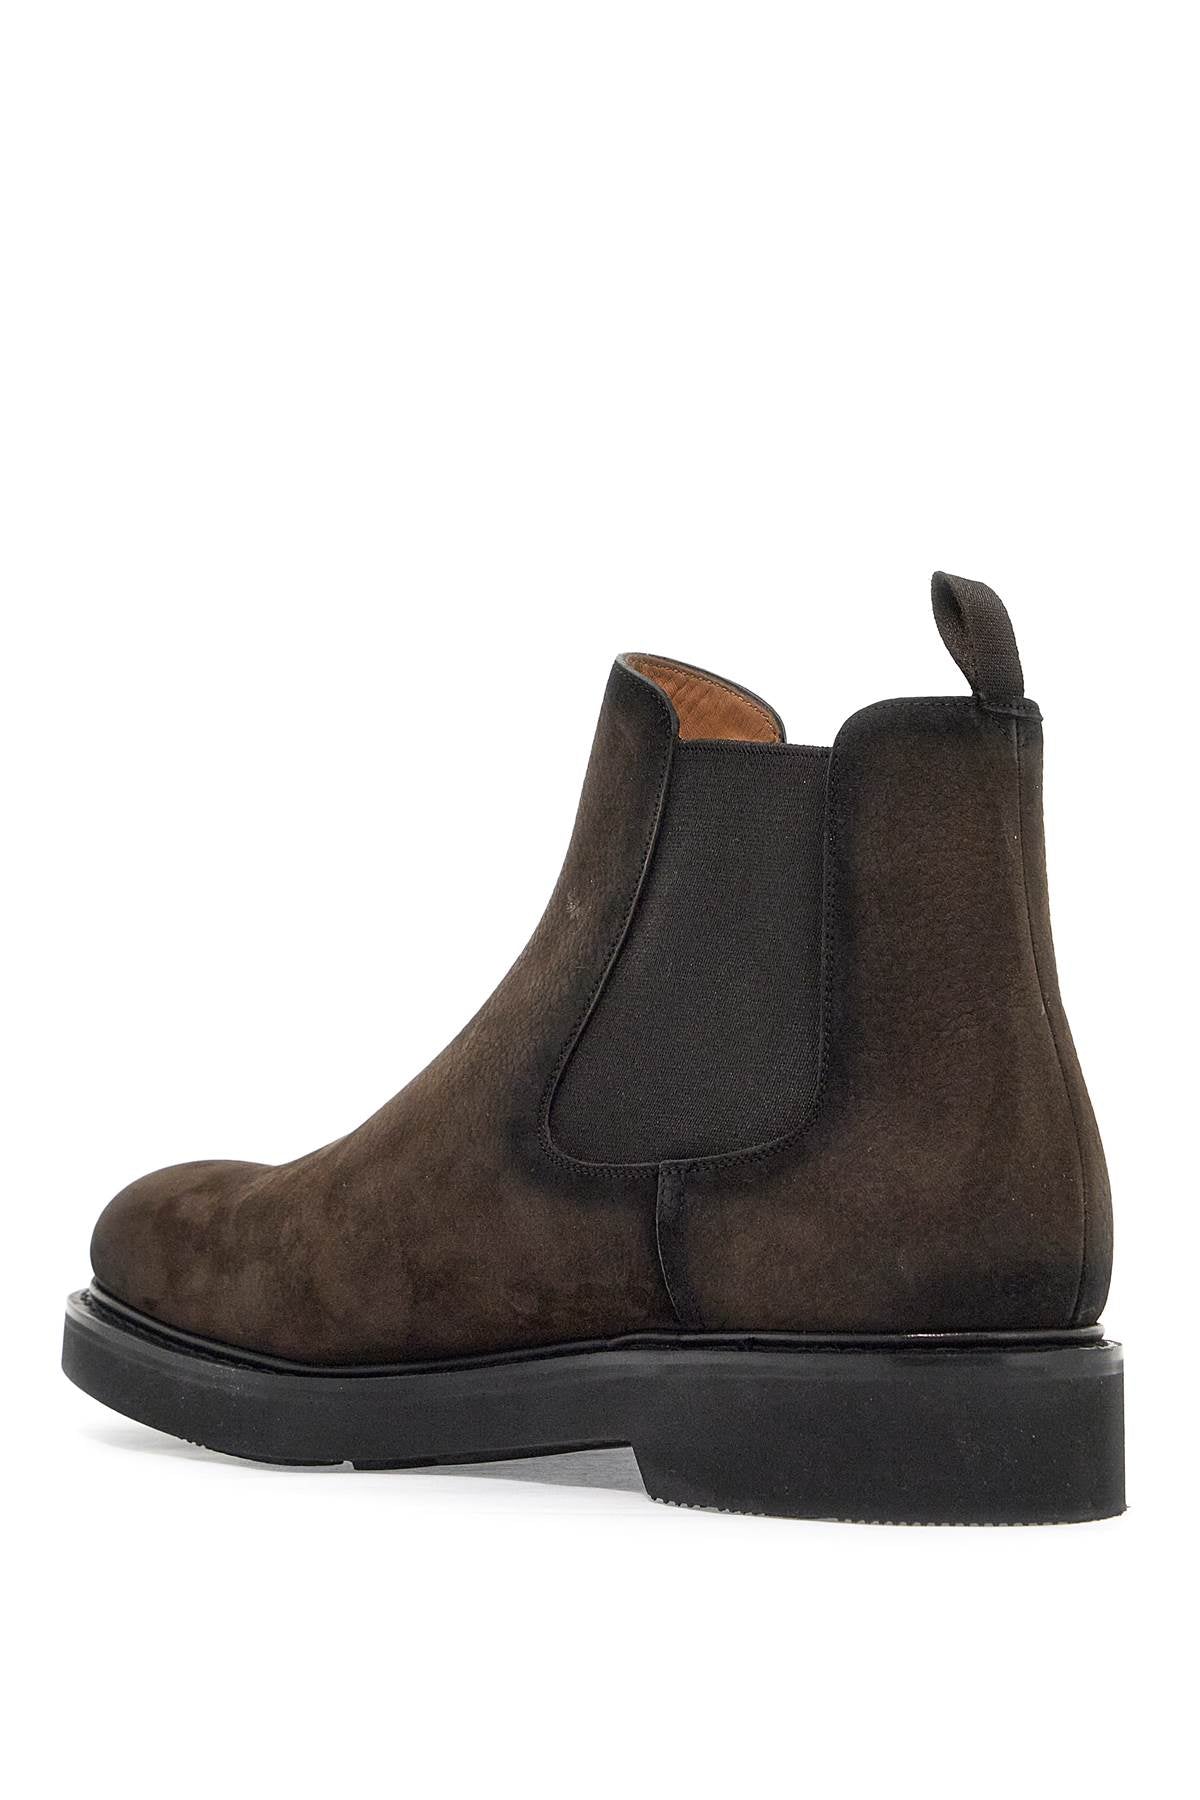 CHURCH'S CHELSEA ANKLE BOOTS